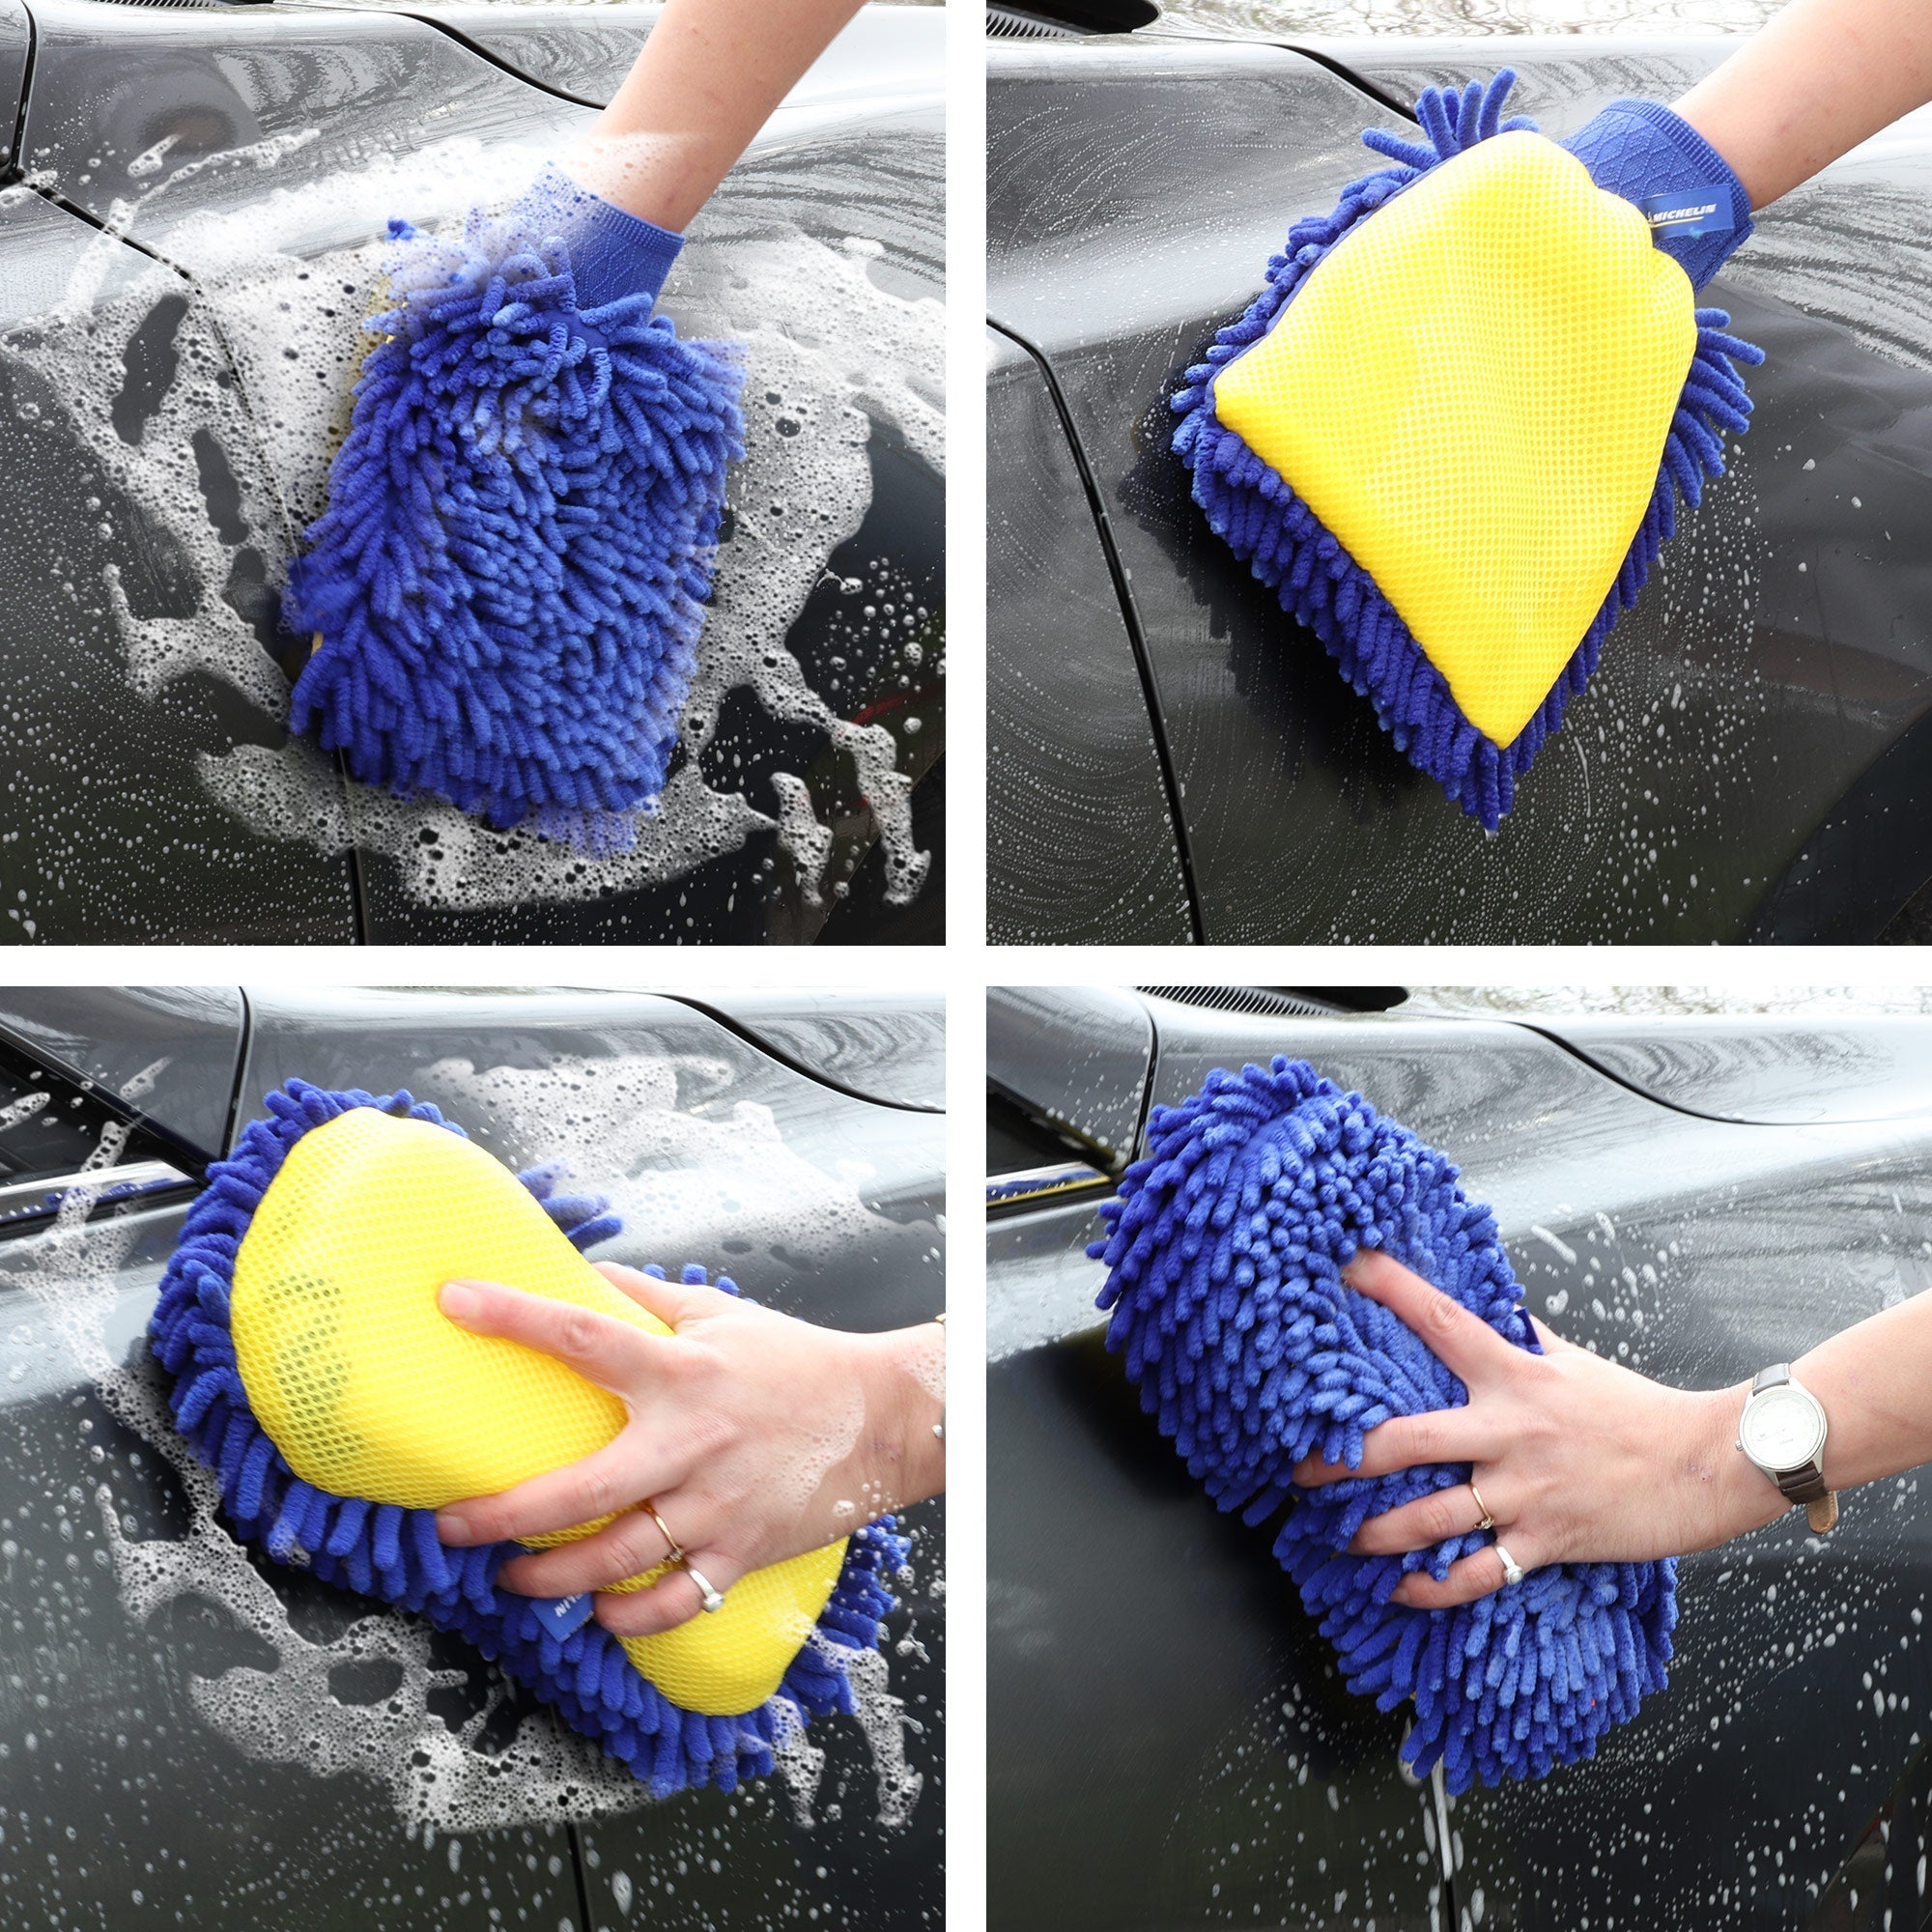 Grid of four lifestyle images of ultimate car wash kit being used to wash a dark gray car: First shows the wash and scrub mitt being used to wash the car with the scrubbing side down; second shows the mitt being used to wash the car with the chenille side down; third shows the wash and scrub sponge being used to wash the car with the chenille side down; fourth shows the sponge being used to wash the car with the scrubbing side down